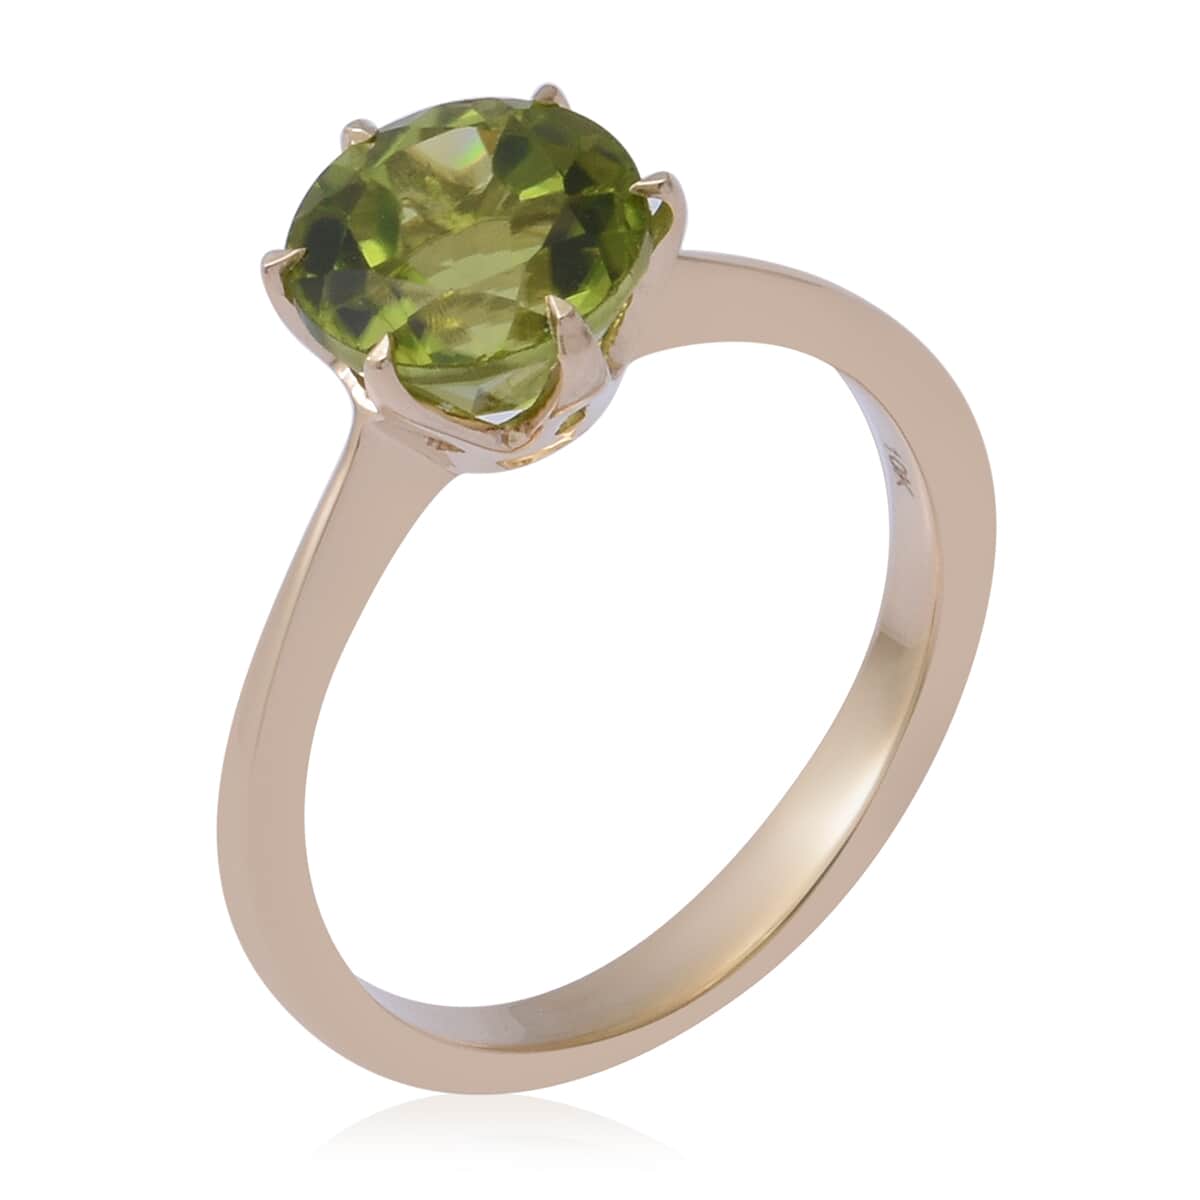 LUXORO 10K Yellow Gold Premium Peridot Solitaire Ring (Size 8.0) 2.15 Grams 2.25 ctw image number 2